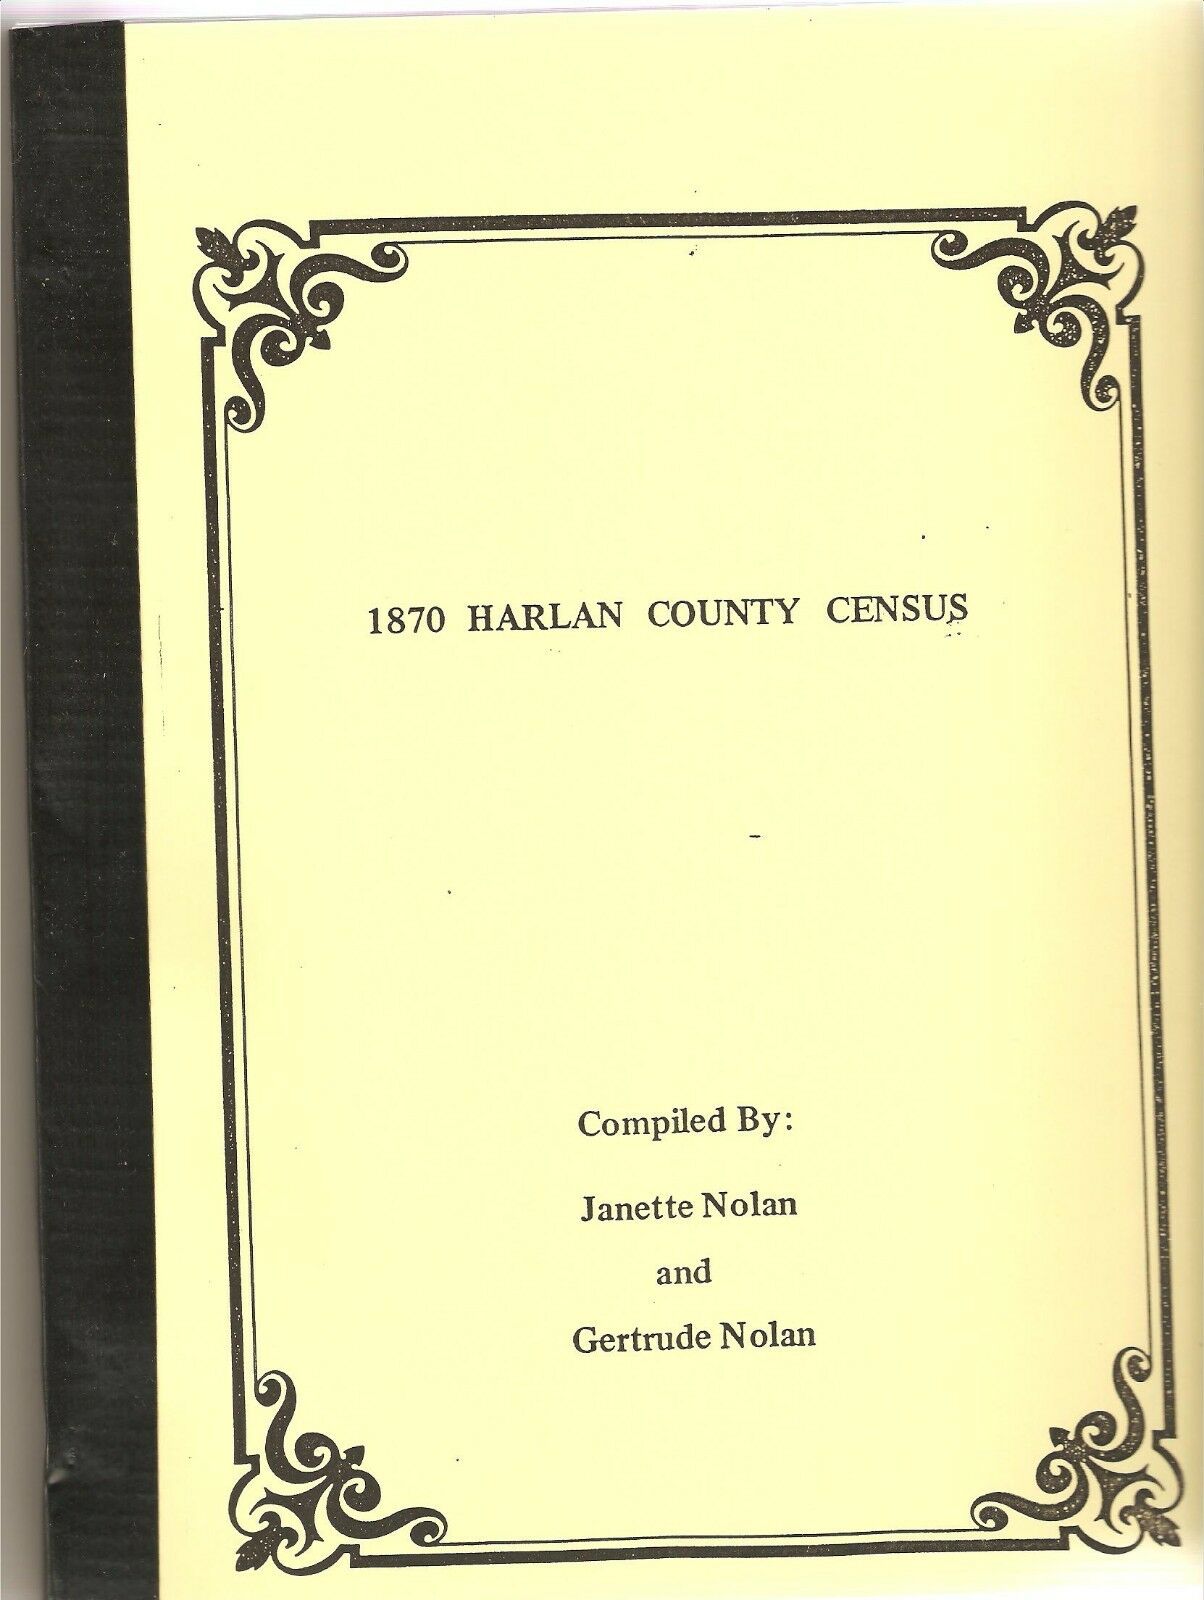 1870 Federal Census Book  Harlan County Ky